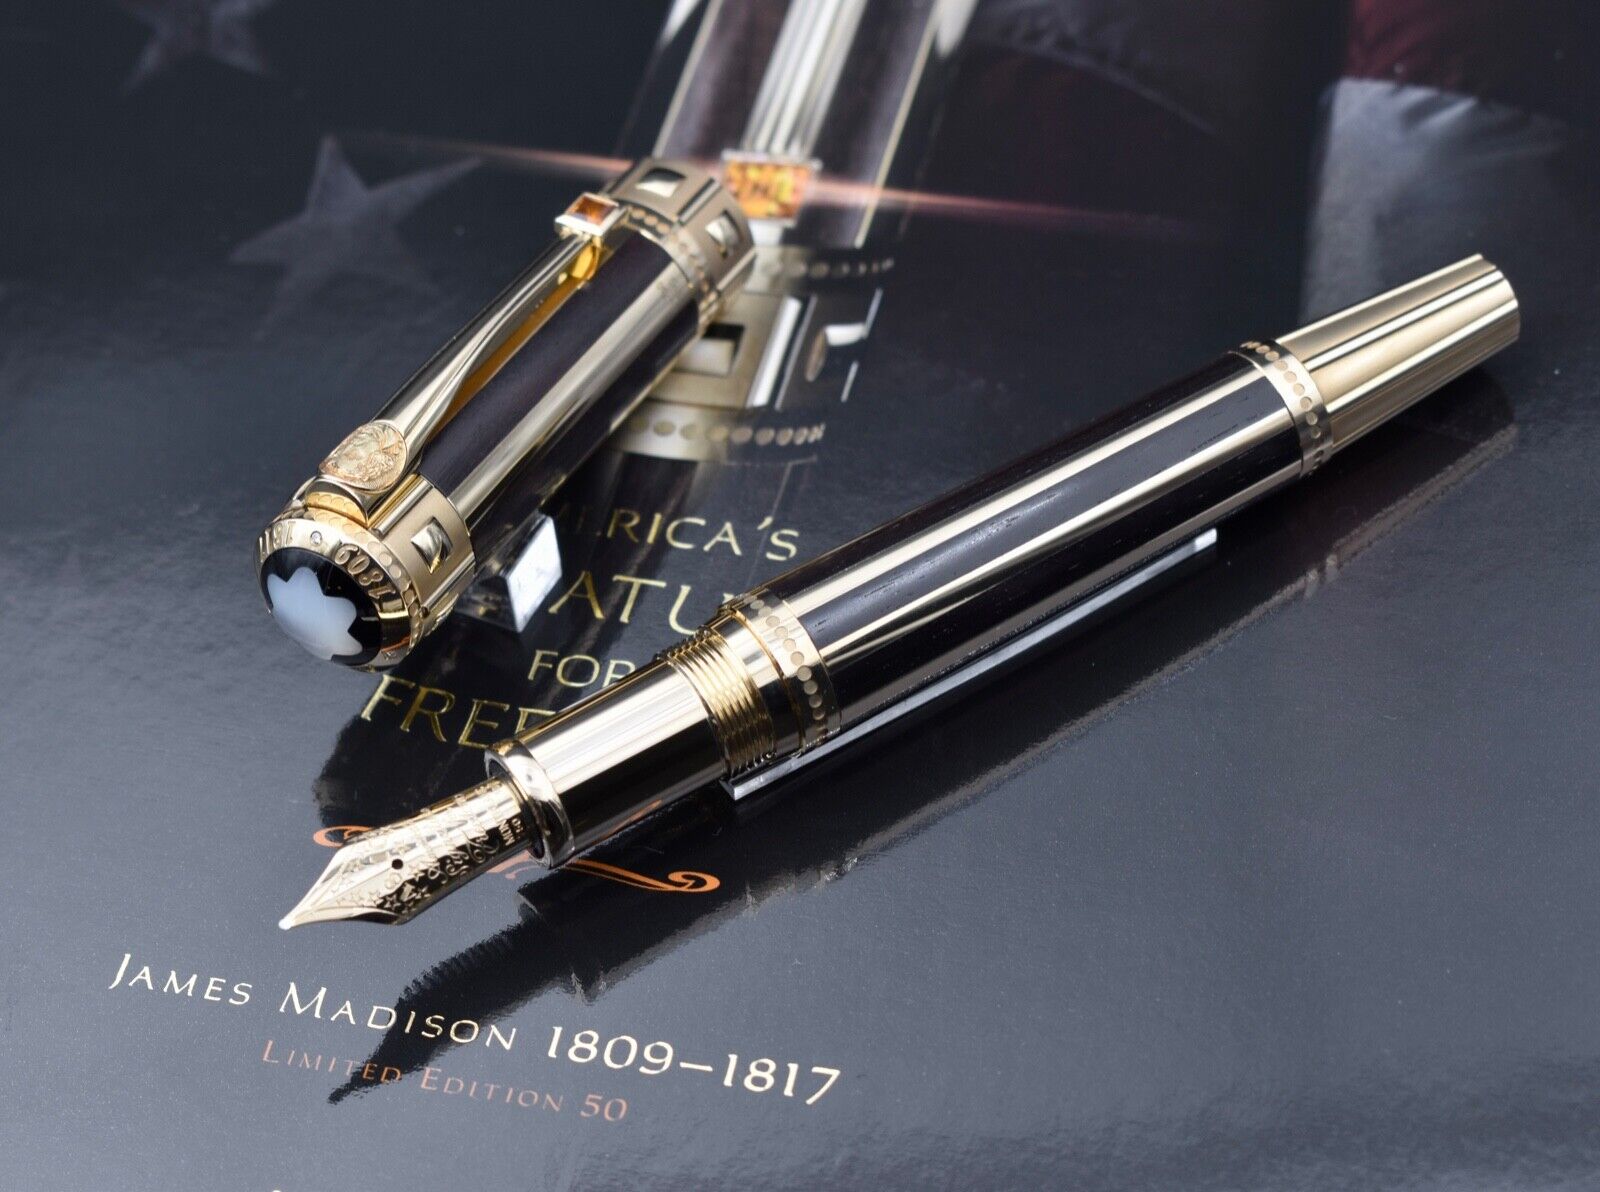 MONTBLANC 2010 James Madison America’s Signatures for Freedom LE50 105363 M